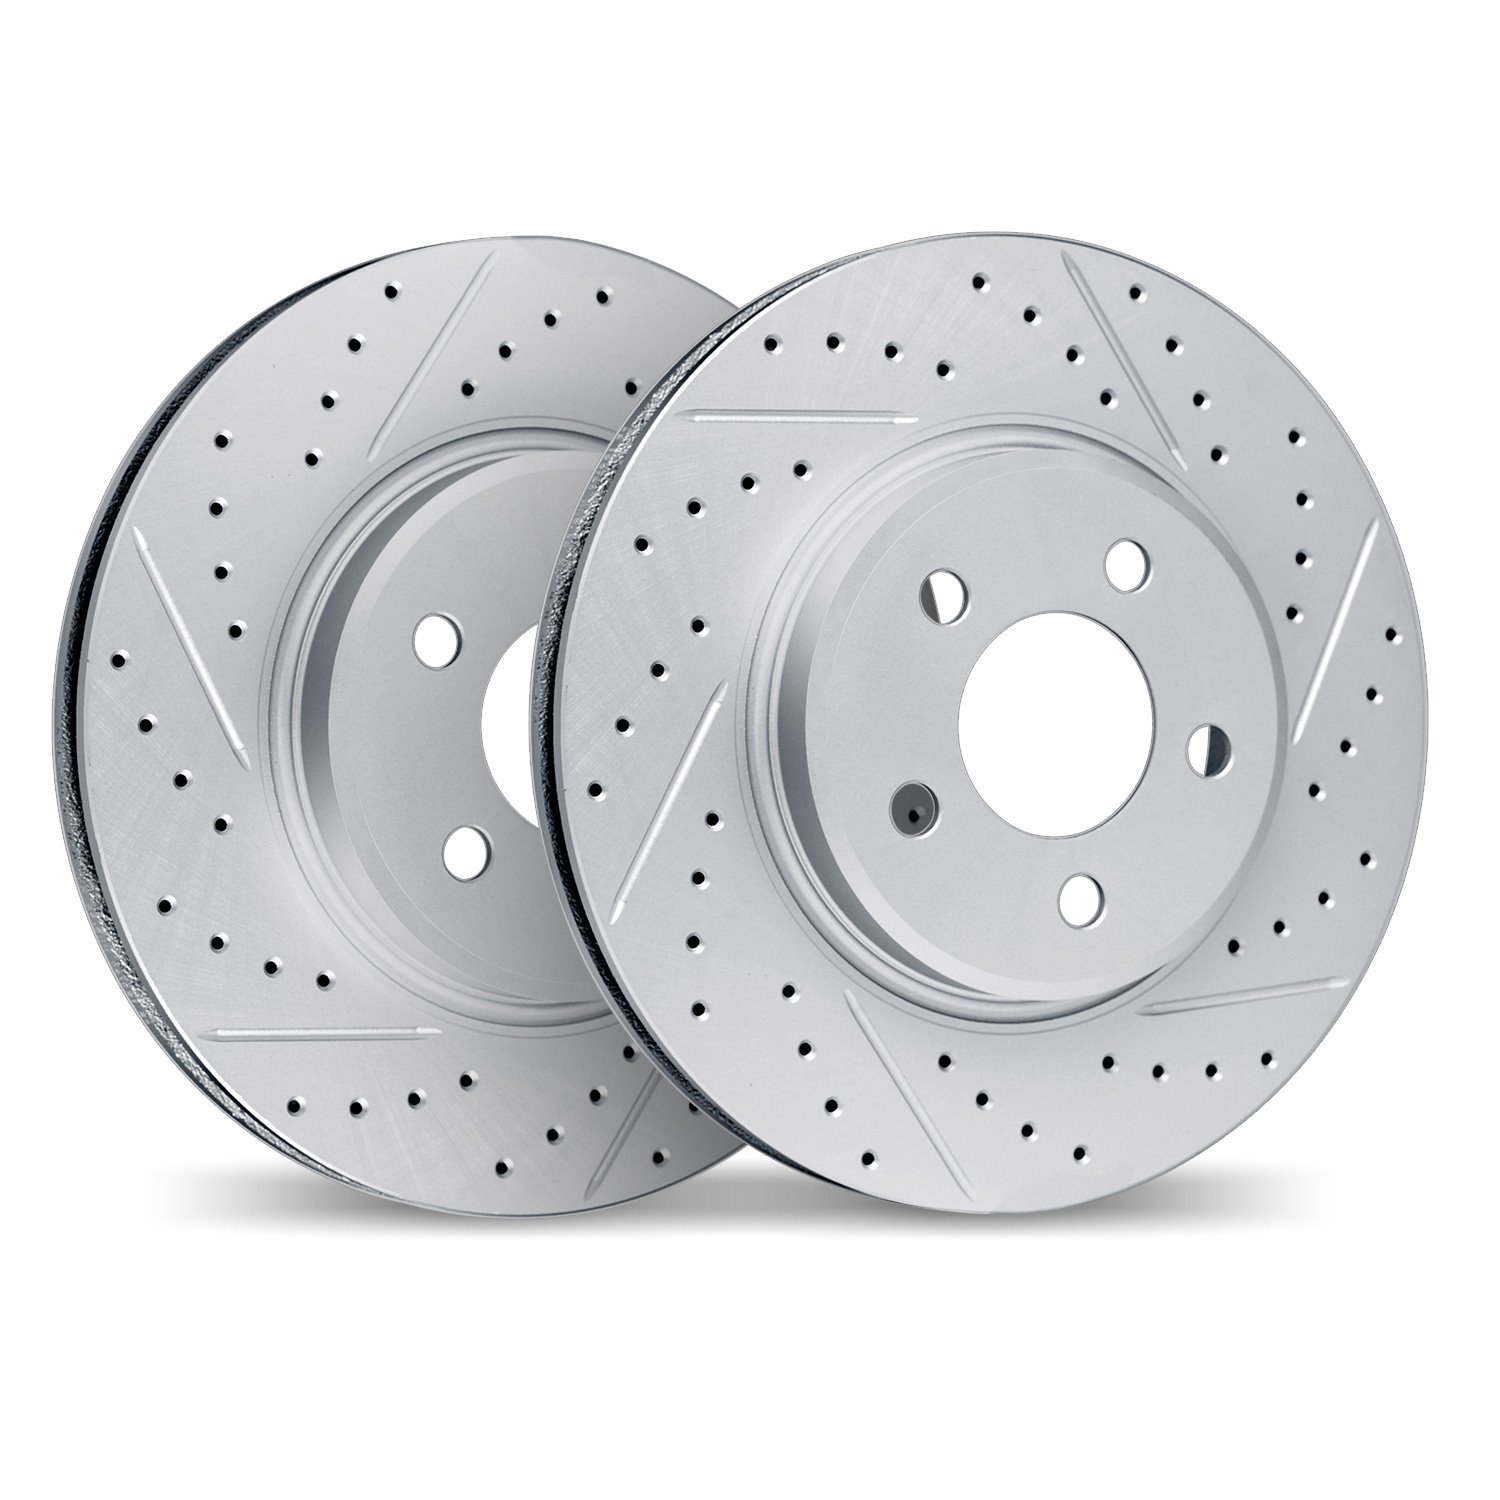 2002-67056 Geoperformance Drilled/Slotted Brake Rotors, Fits Select Infiniti/Nissan, Position: Rear